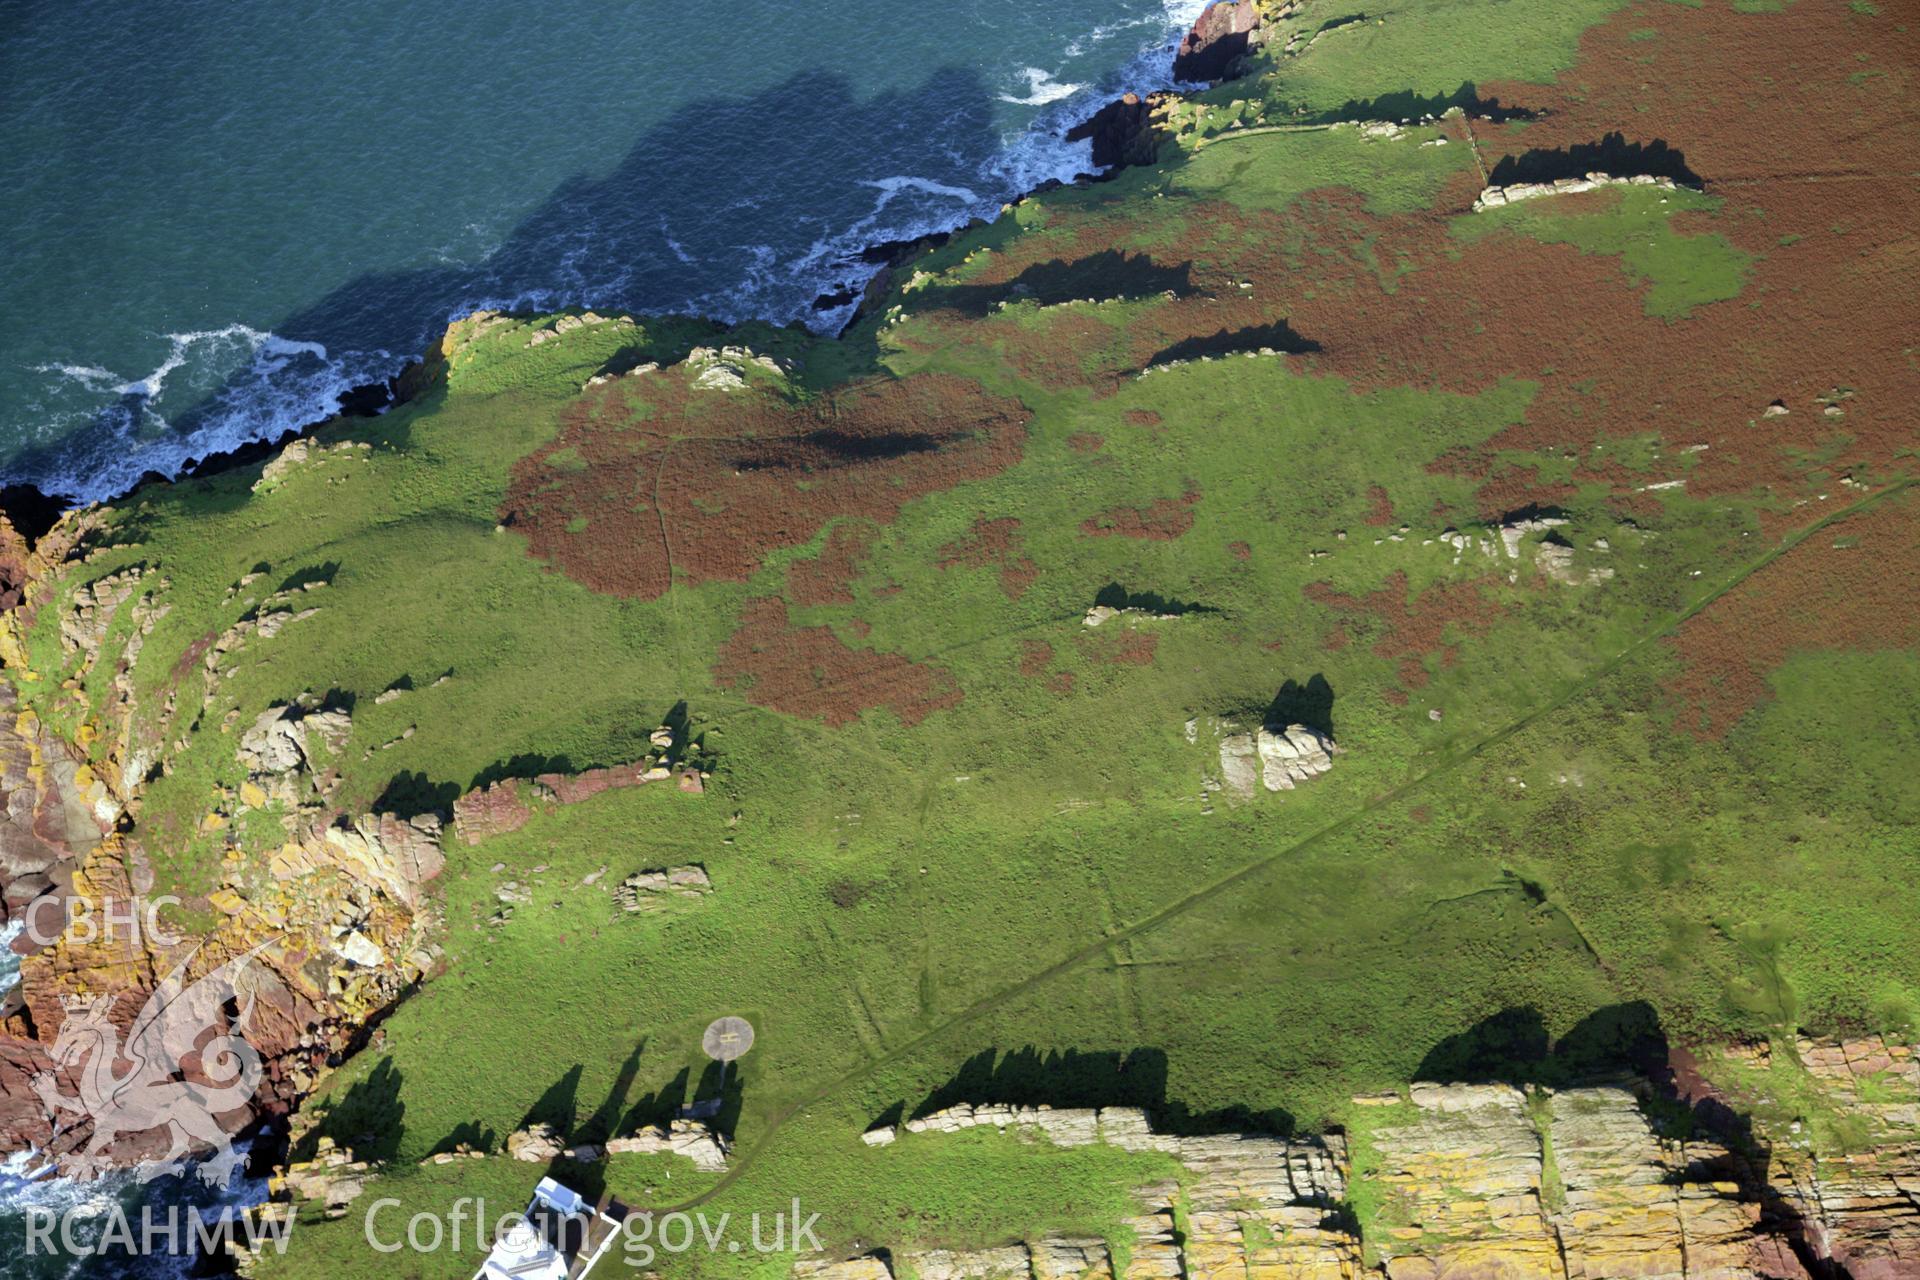 RCAHMW colour oblique photograph of field system, Skokholm Island, viewed from the south. Taken by O. Davies & T. Driver on 22/11/2013.